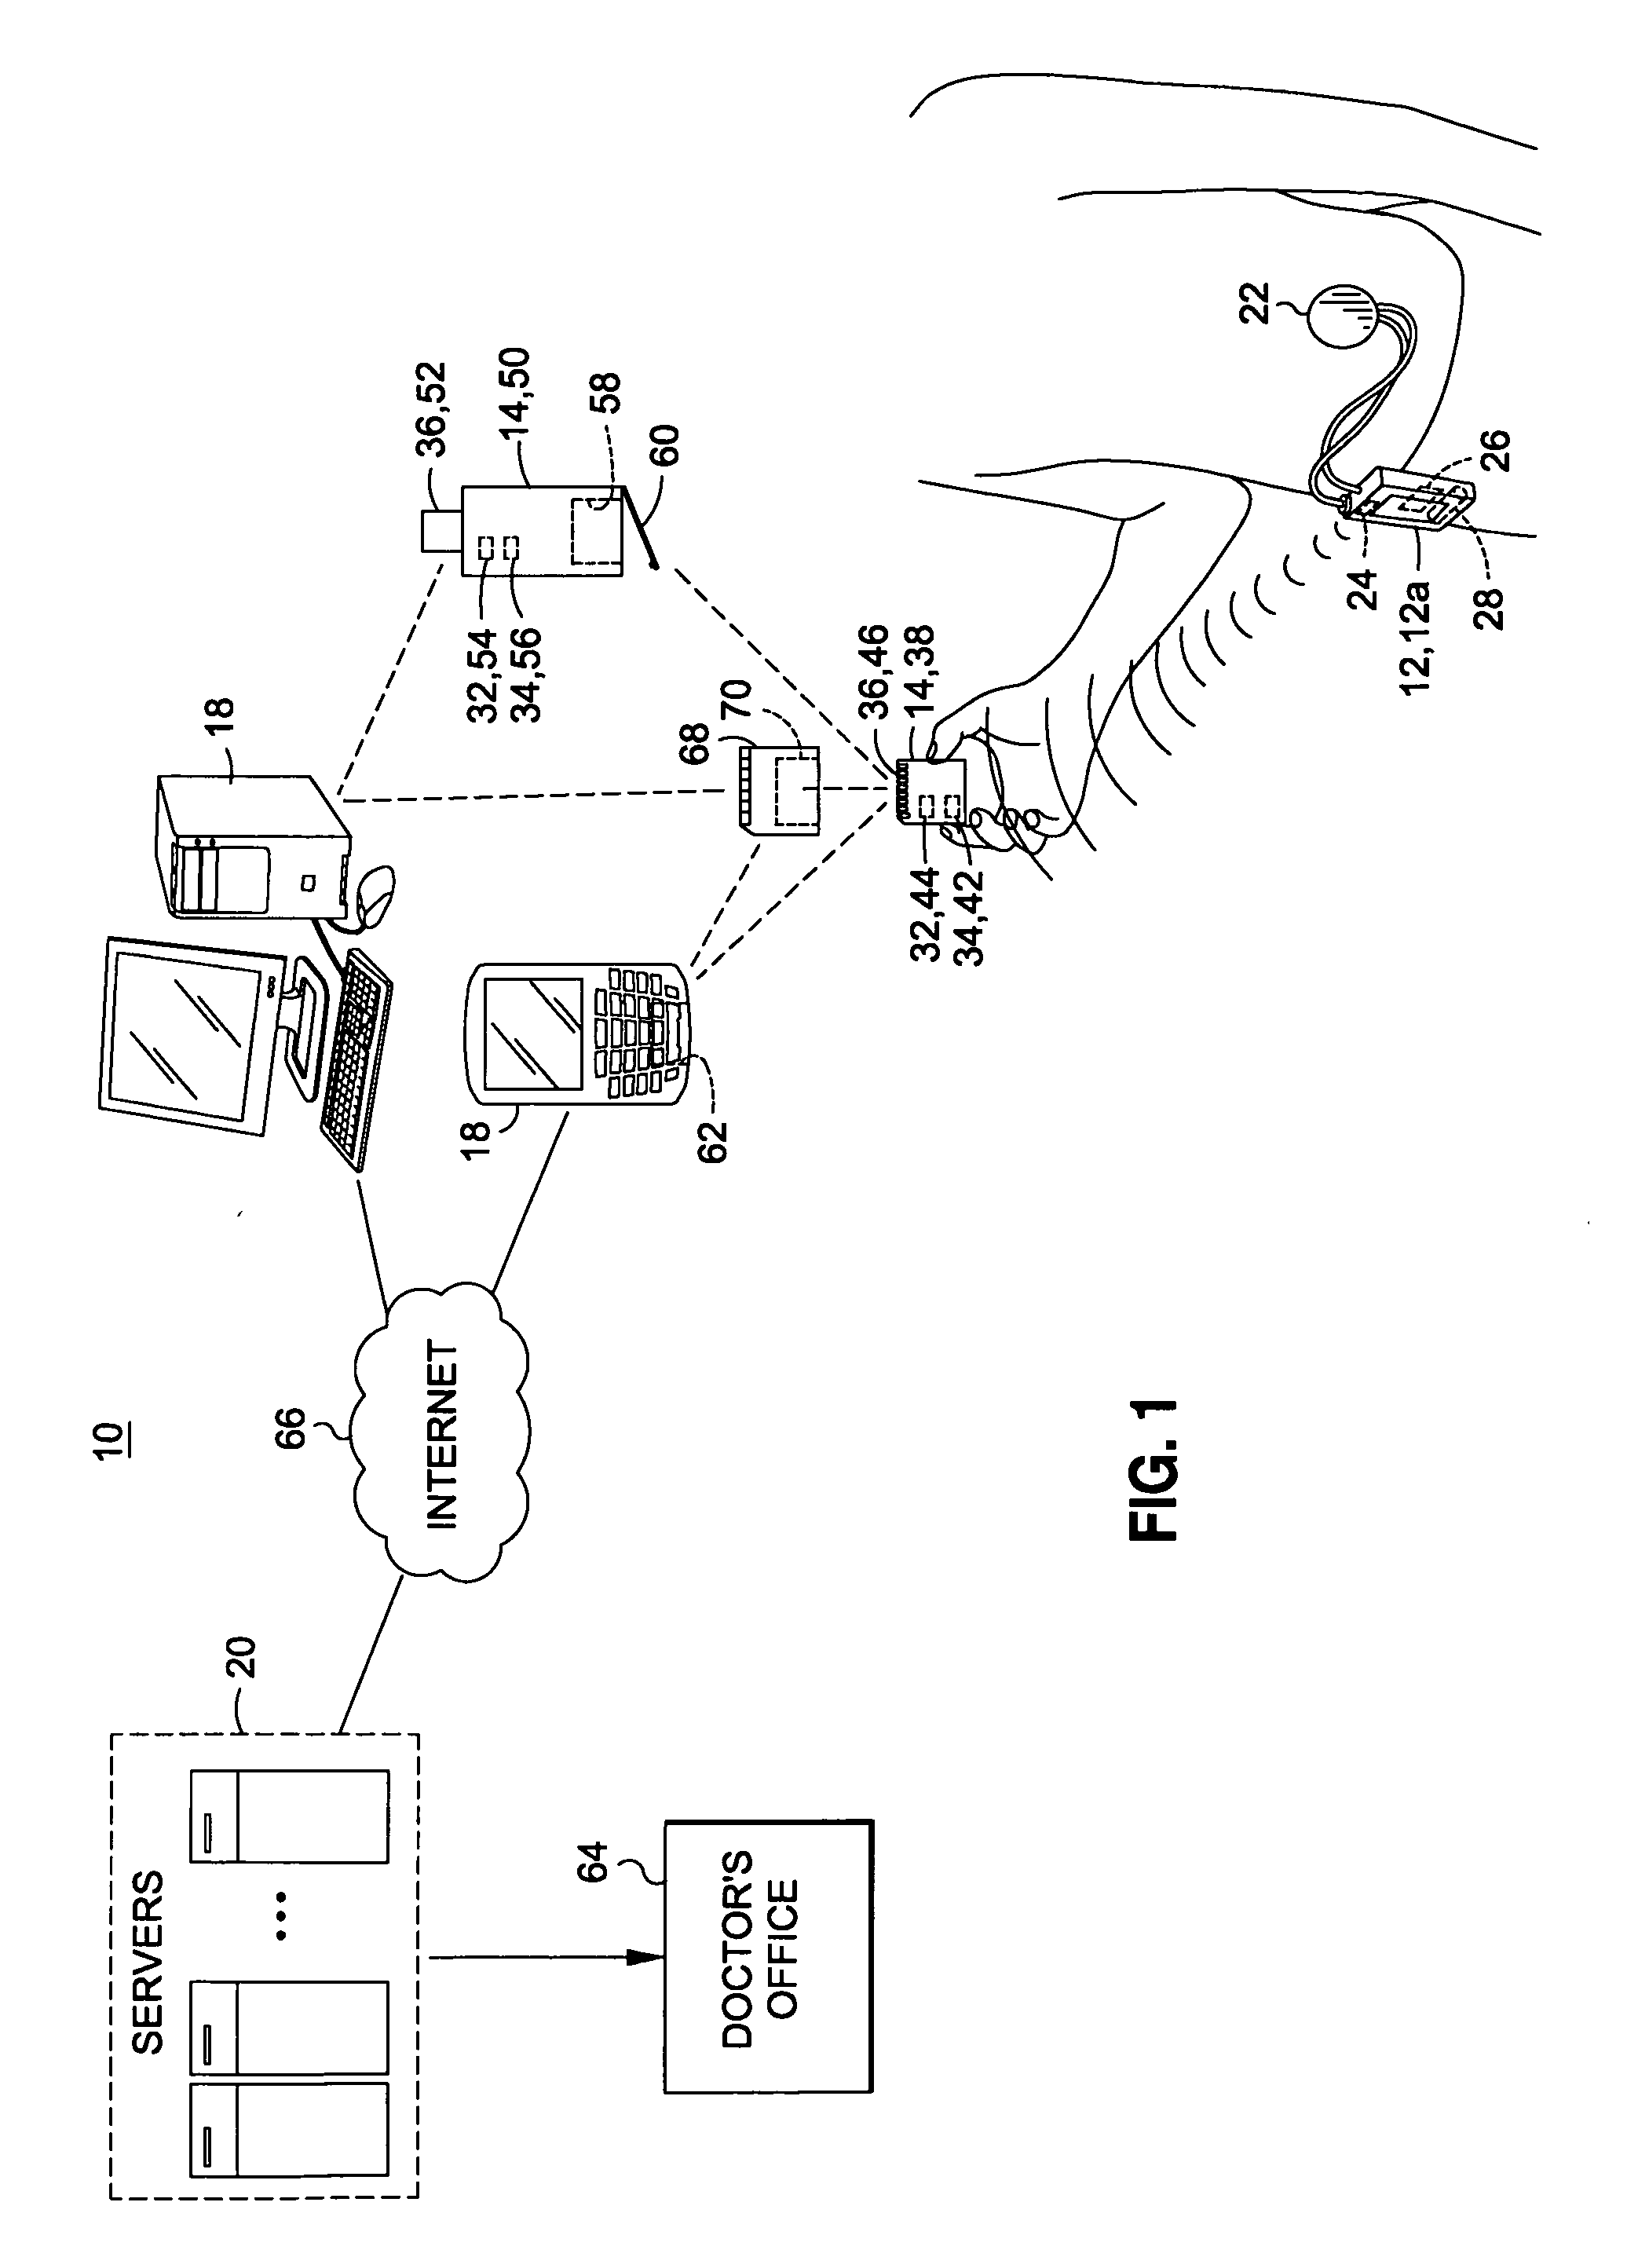 System and method for acquiring and transferring data to a remote server